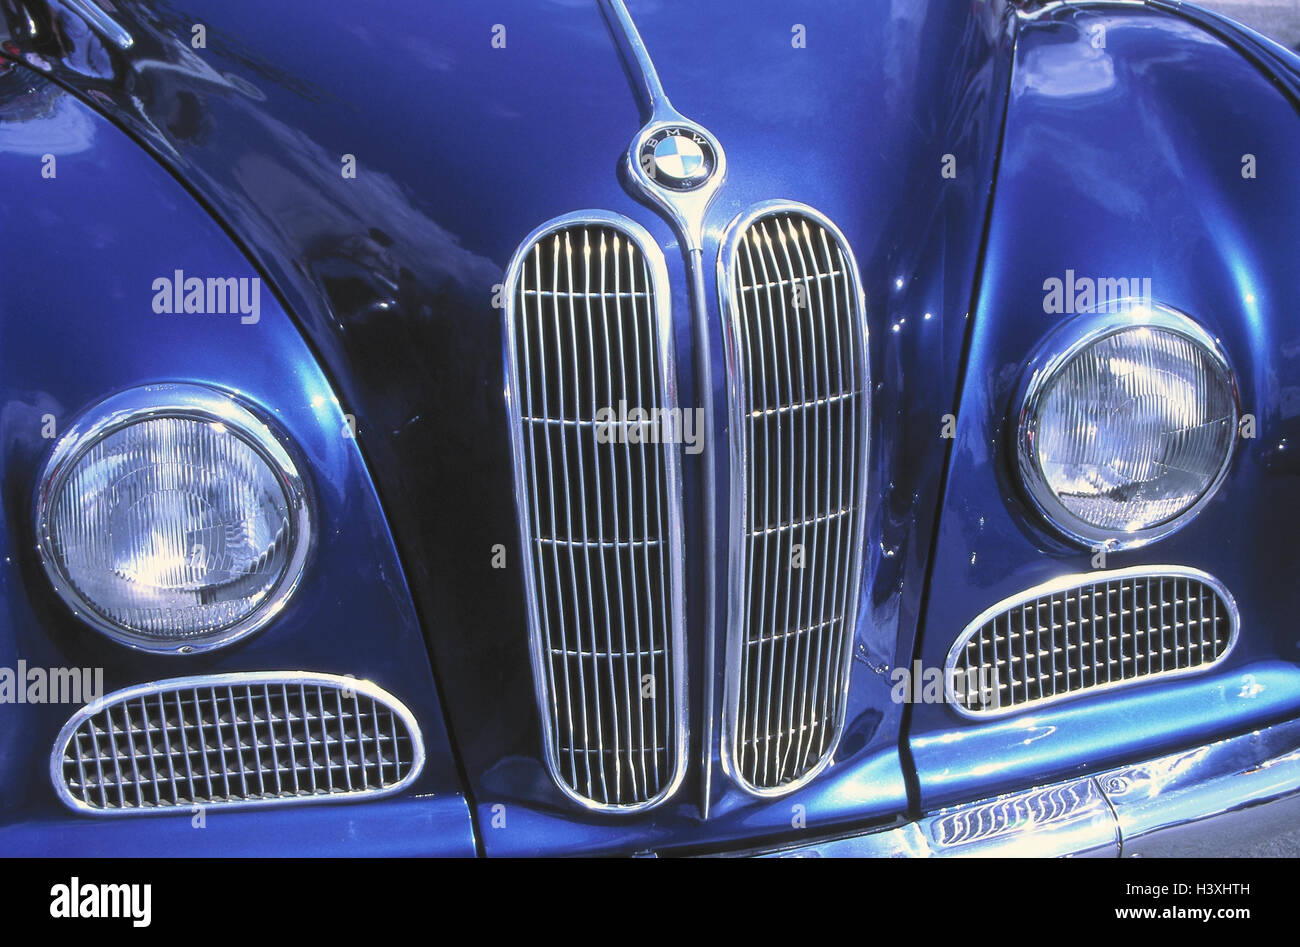 Car, old-timer, BMW 502, year manufacture in 1955, front view, detail, car, passenger car, blue, autotypes, radiator grille, headlight, nostalgically, nostalgia, Stock Photo